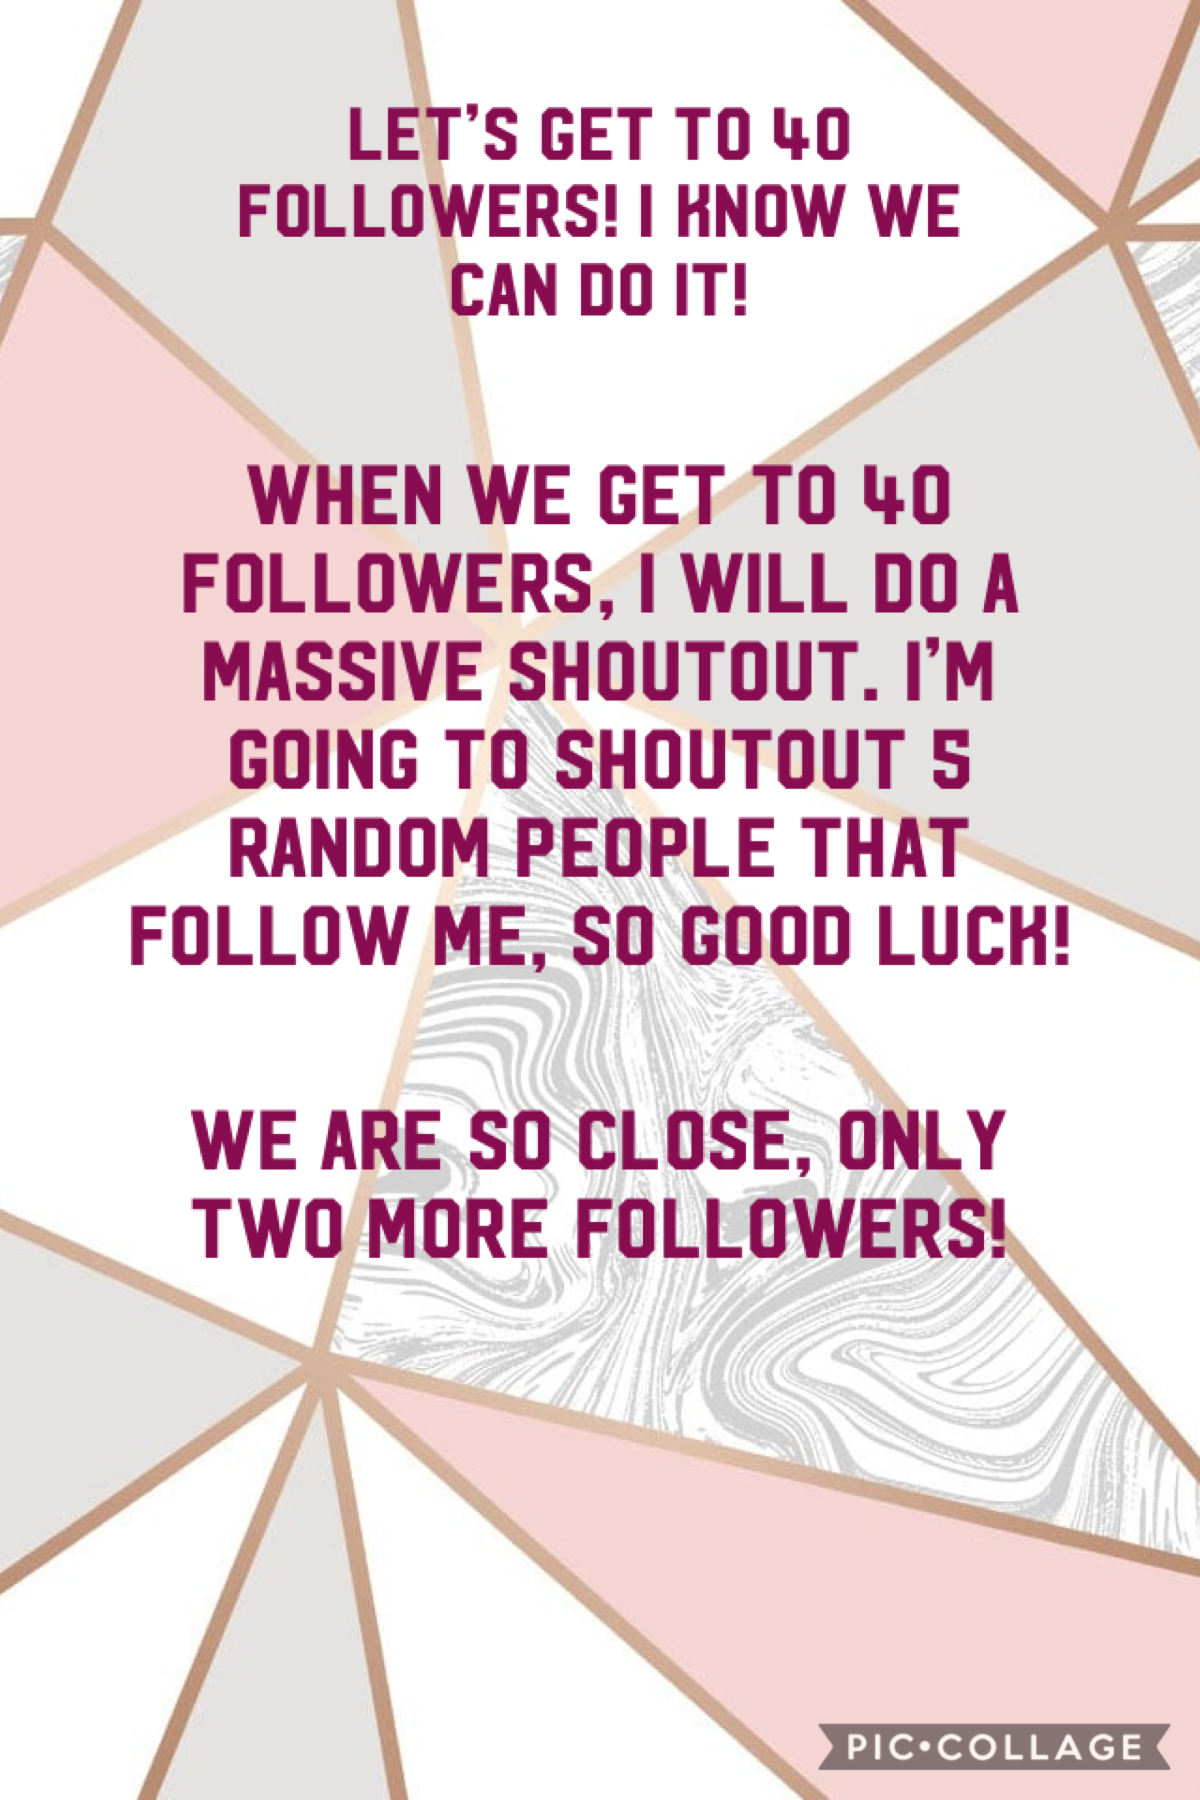 We r sooooo close, it would literally mean the world to me if we got there, so thanks to all my current followers!